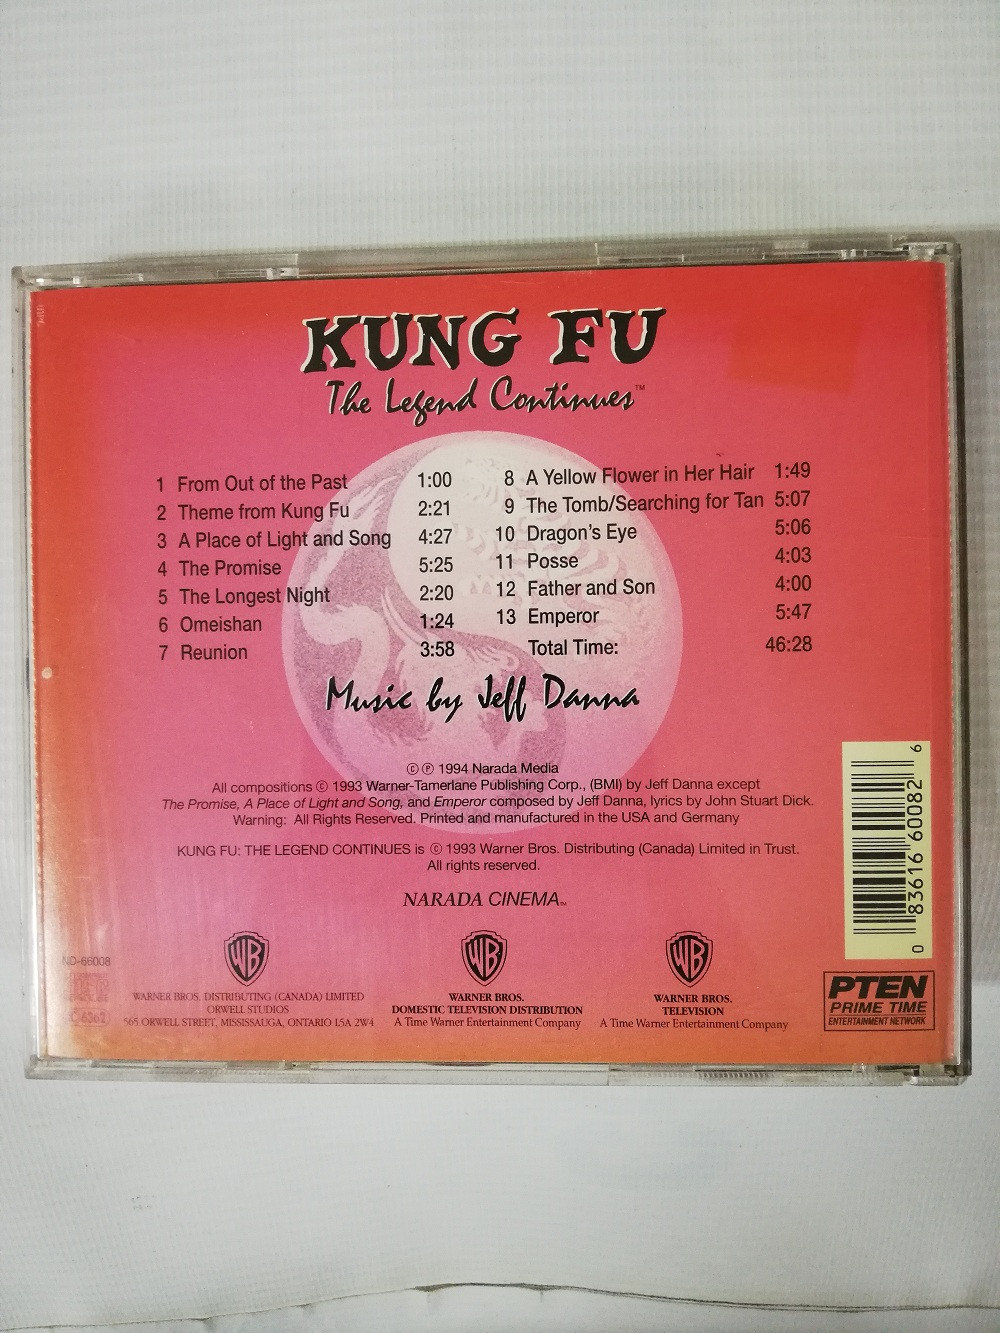 Imagen CD KUNG FU THE LEGEND CONTINUES - SOUNDTRACK TO THE POPULAR TELEVISION SERIES 2